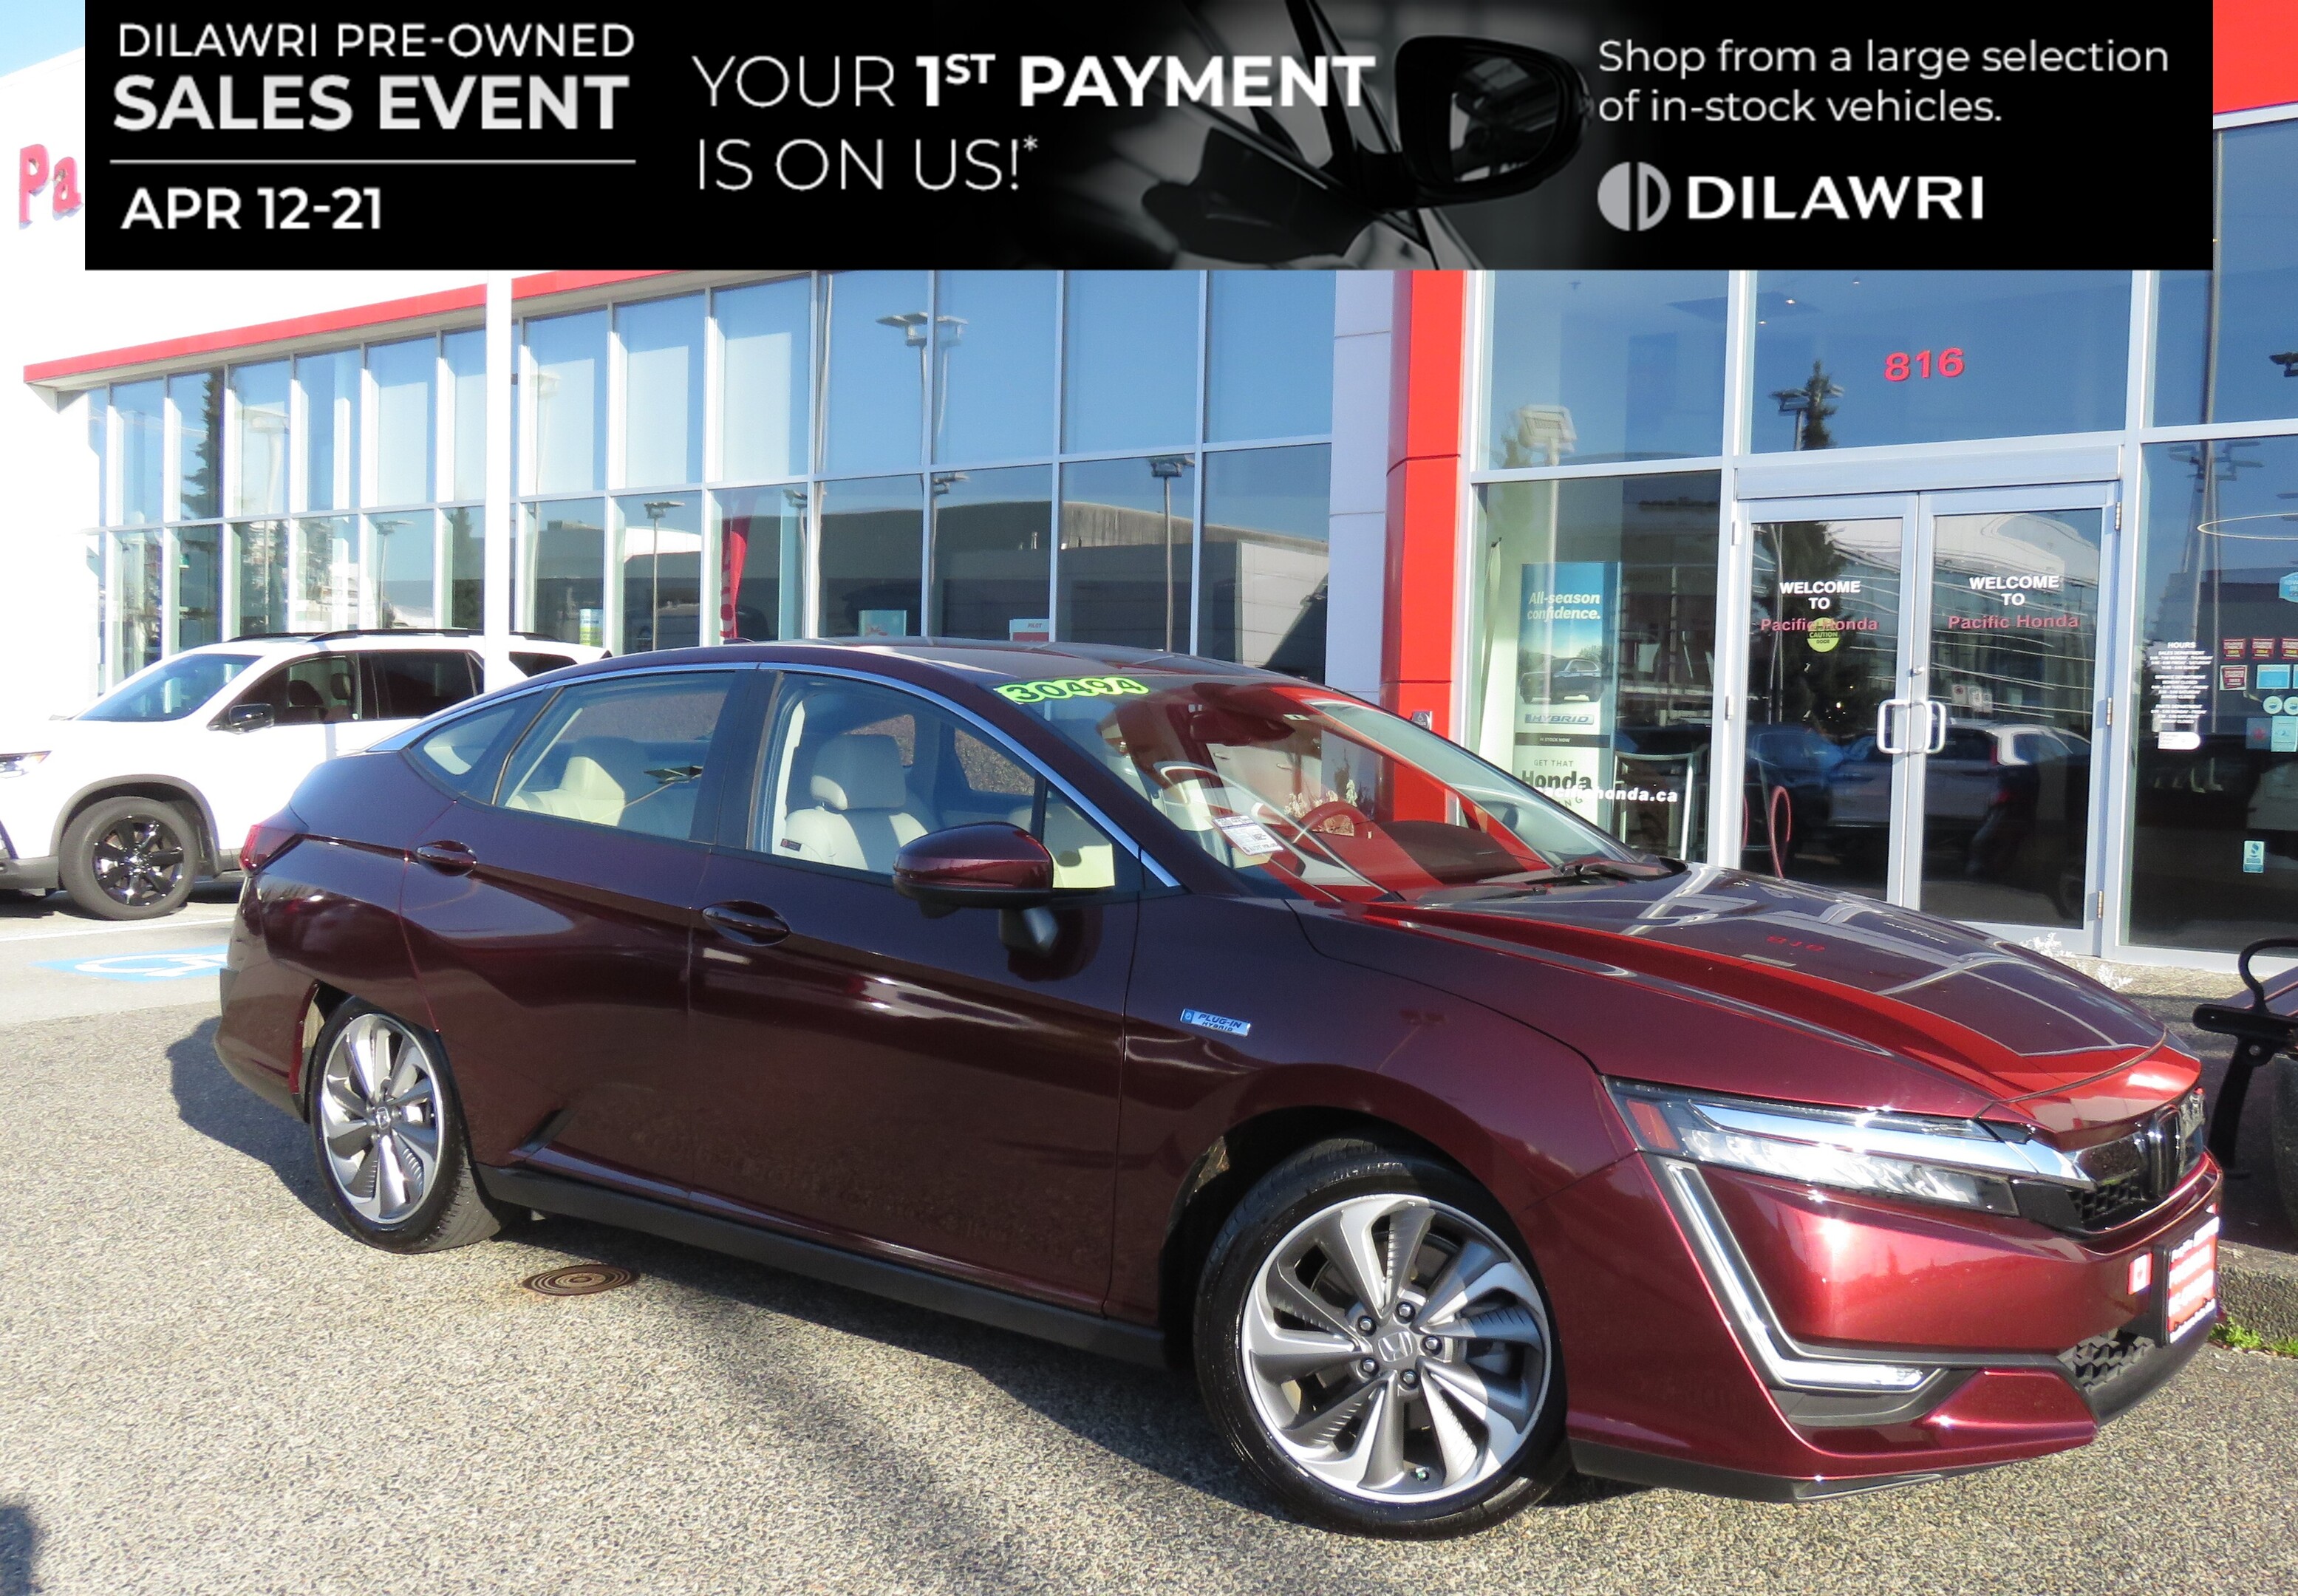 2018 Honda CLARITY PLUG-IN TOURING | Dilawri Pre-owned Event ON Now! |